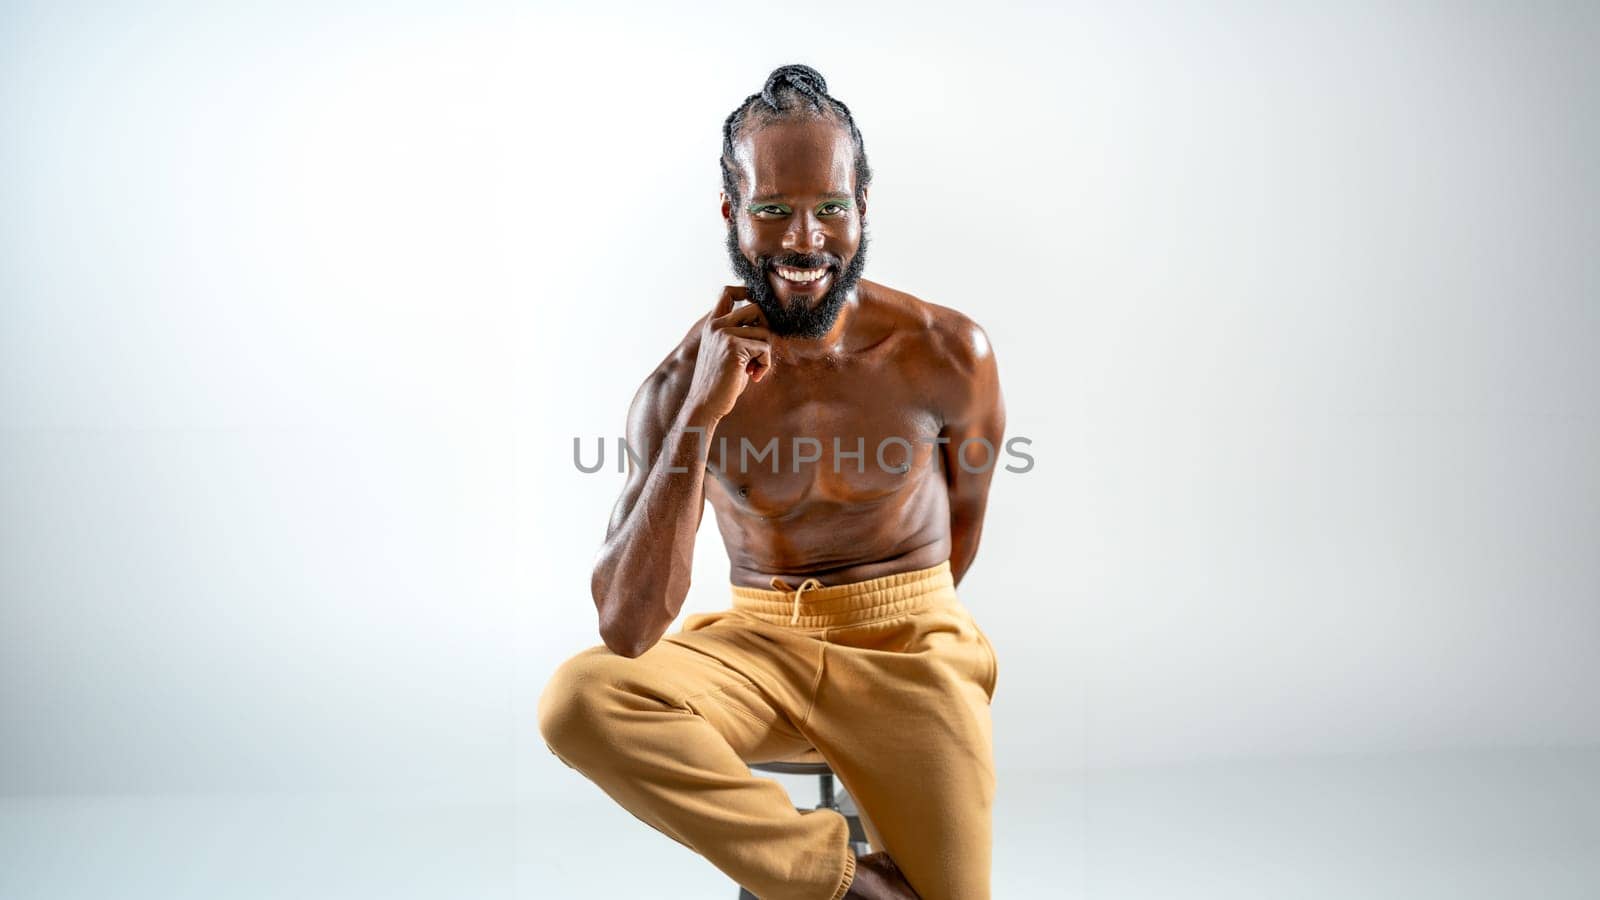 Portrait of smiling African American gay man with bright makeup. Shirtless muscular man sitting on stool and looking at camera. LGBTQ person is posing on white background.